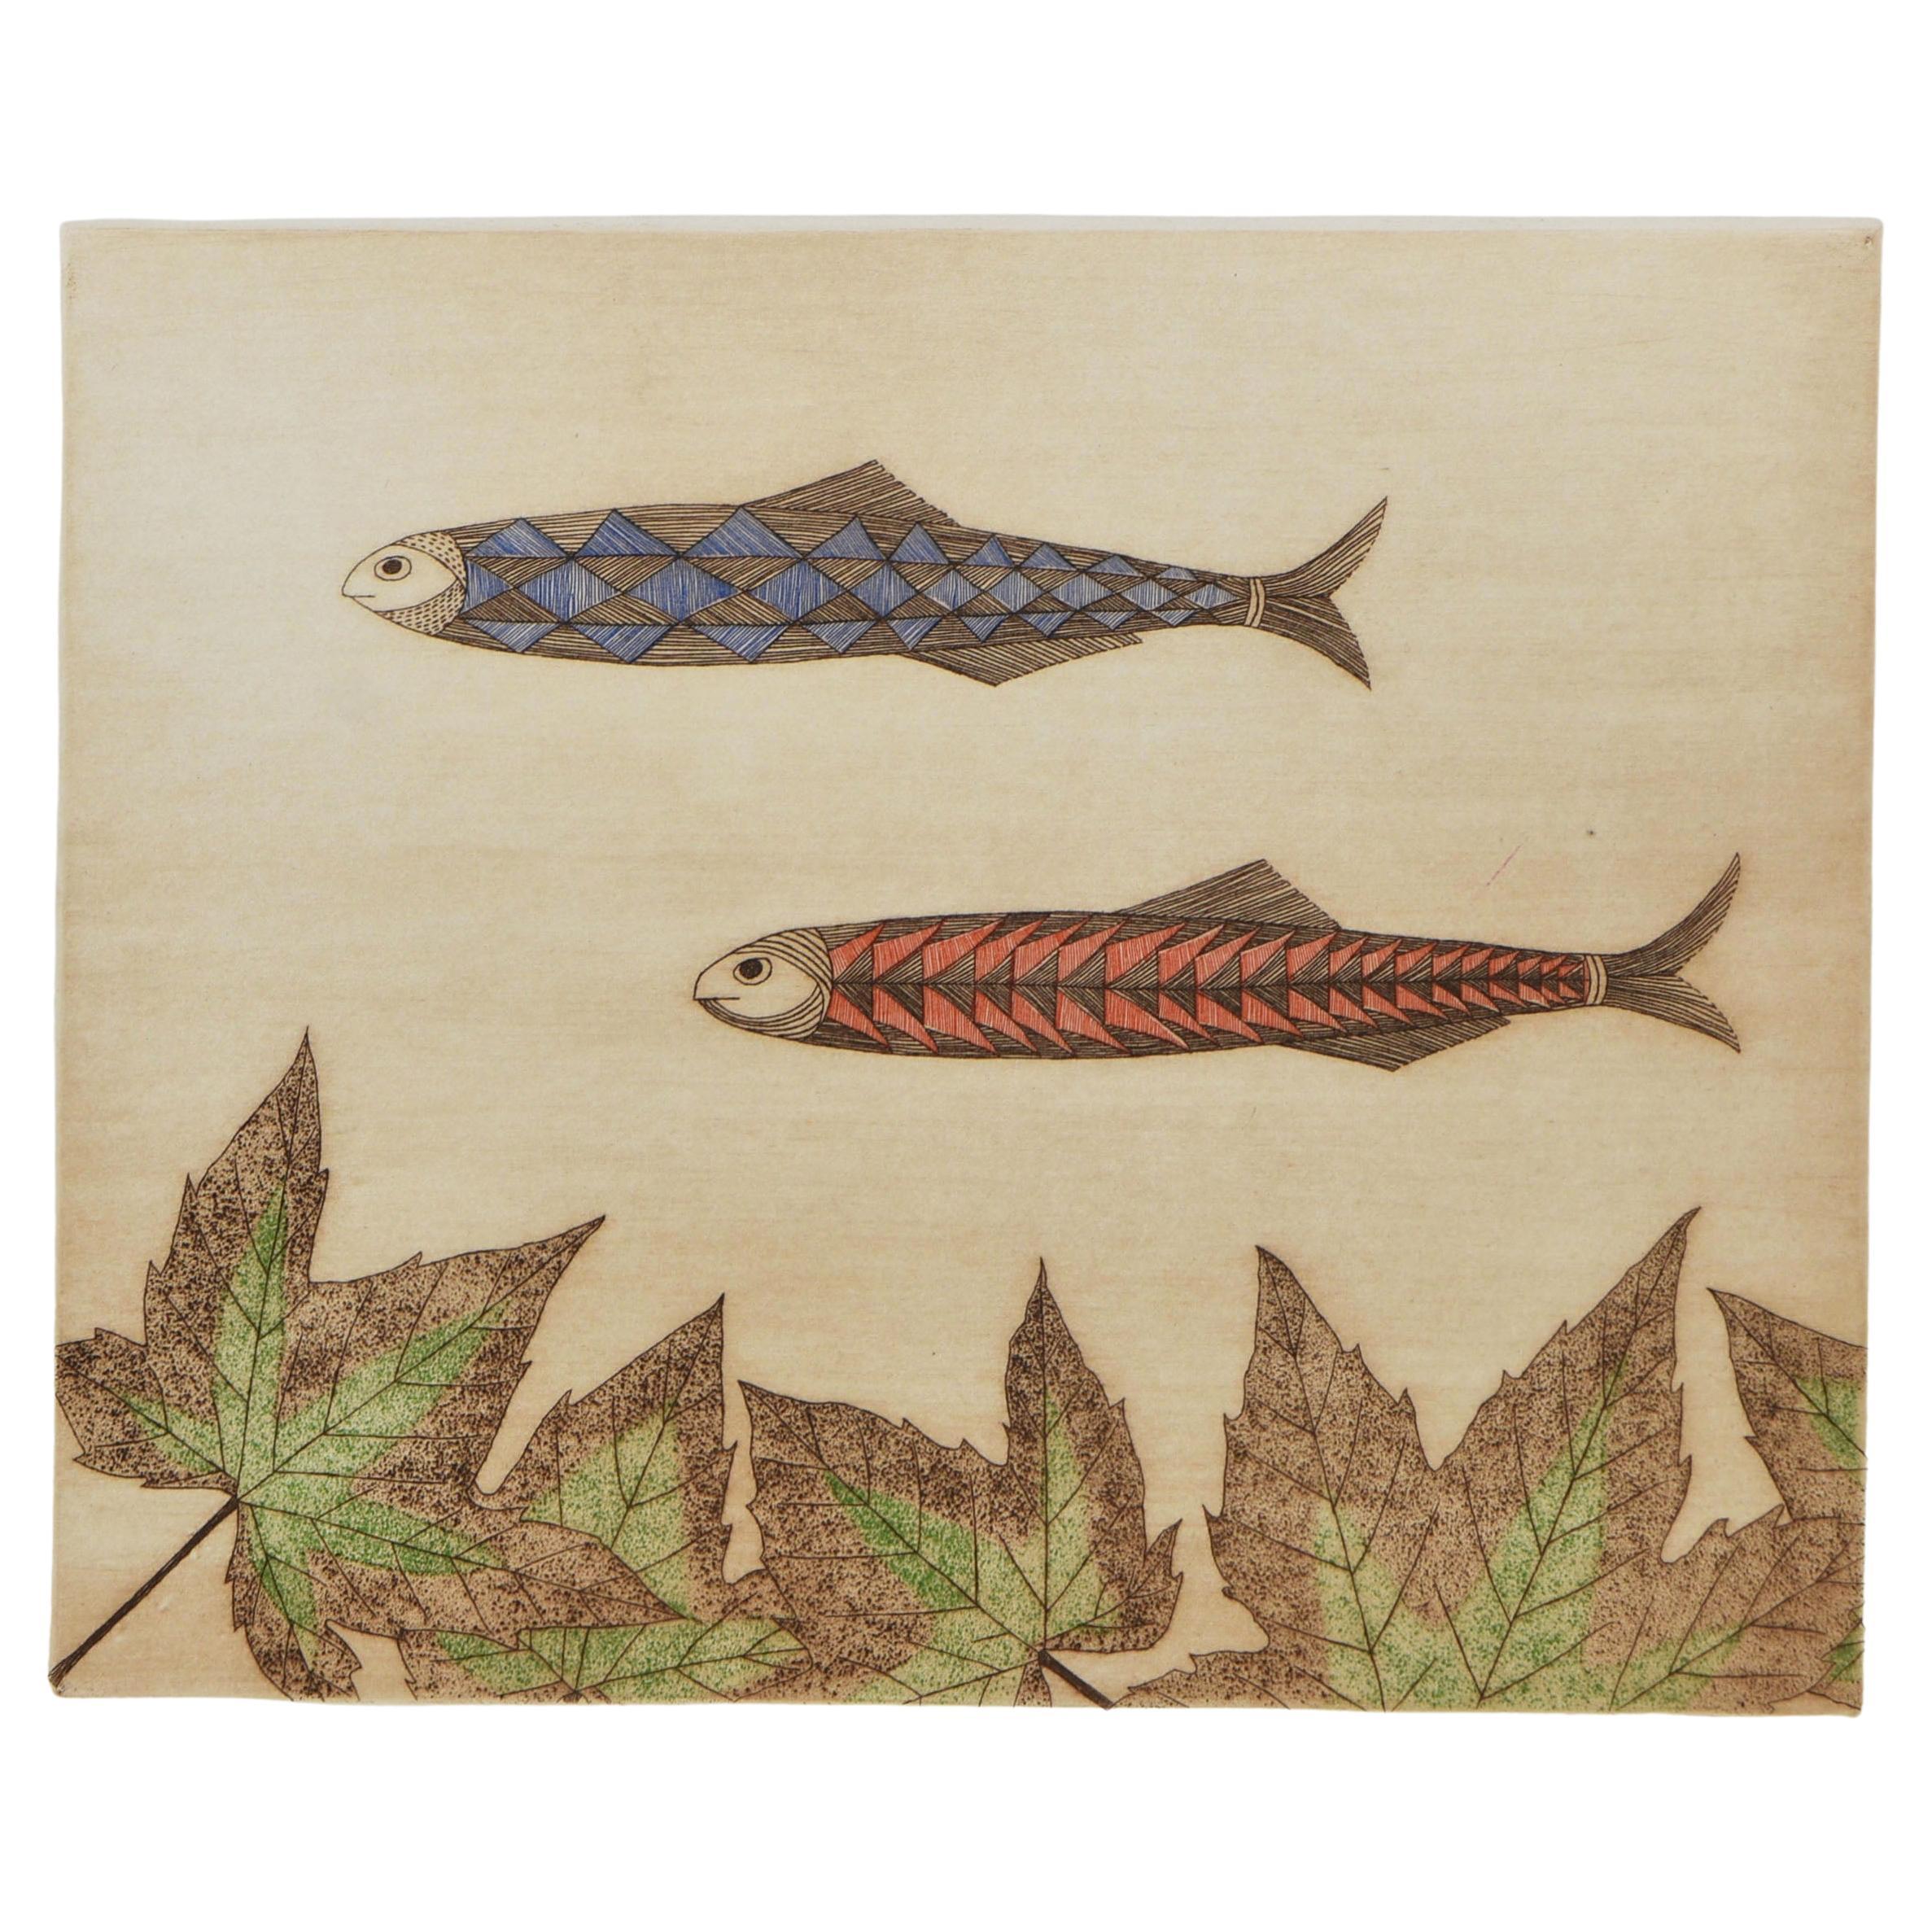 Keiko Minami Signed Etching with Aquatint on Bfk Rives Wove 'Fishes' Japanese For Sale